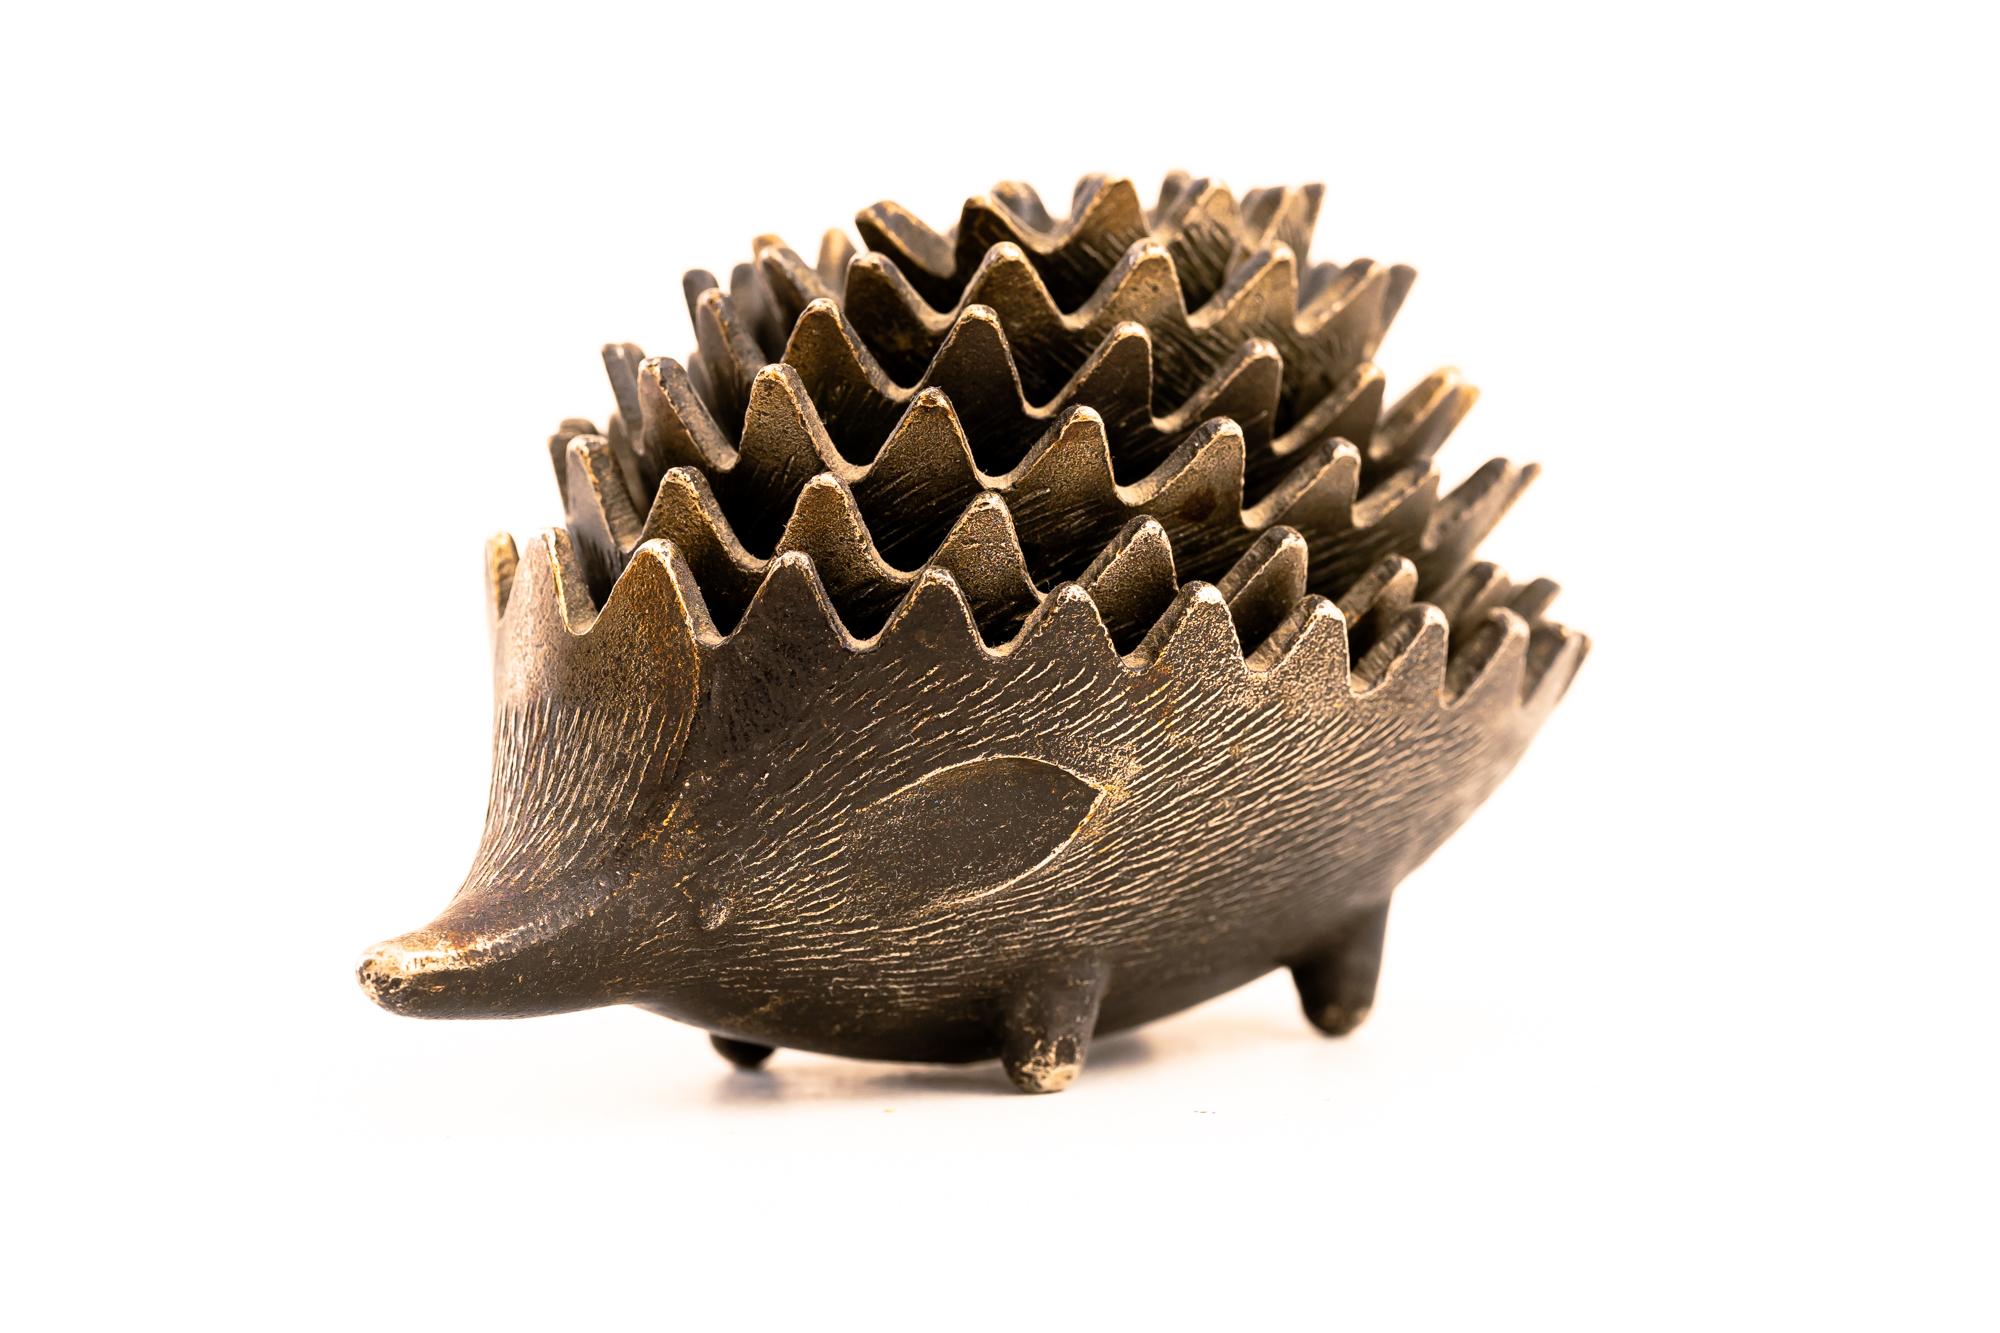 Mid-20th Century Hedgehog Ashtray by Walter Bosse for Hertha Baller, Around 1950s